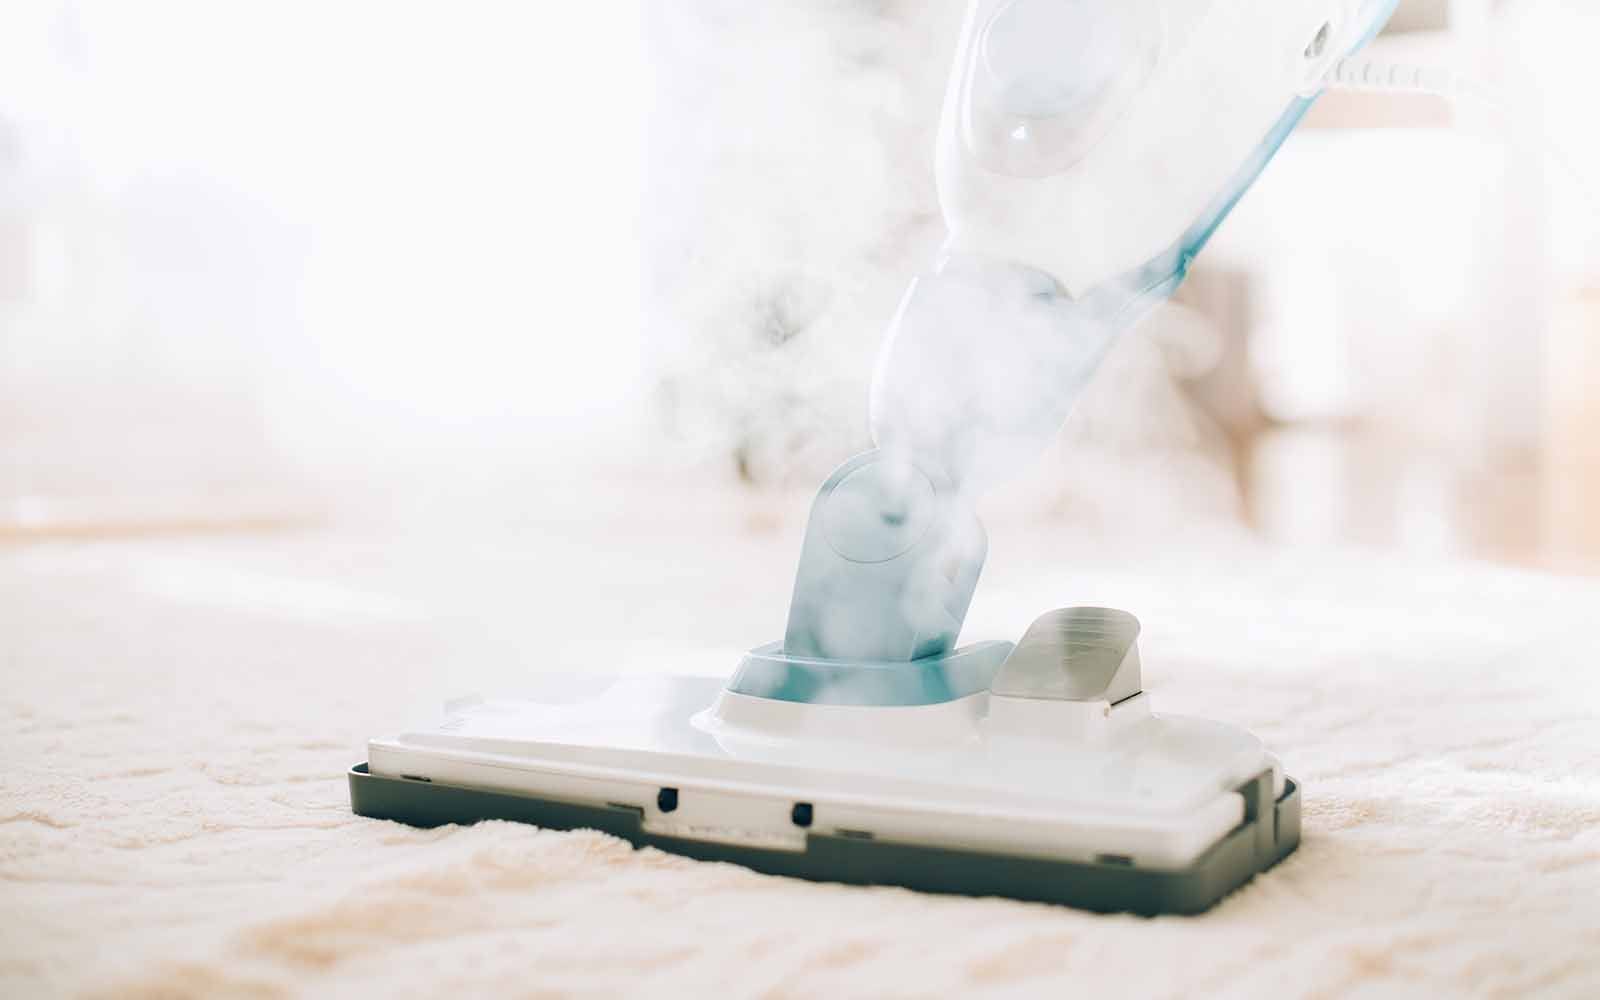 6 Benefits Of Using Steam For Sanitizing And Disinfecting